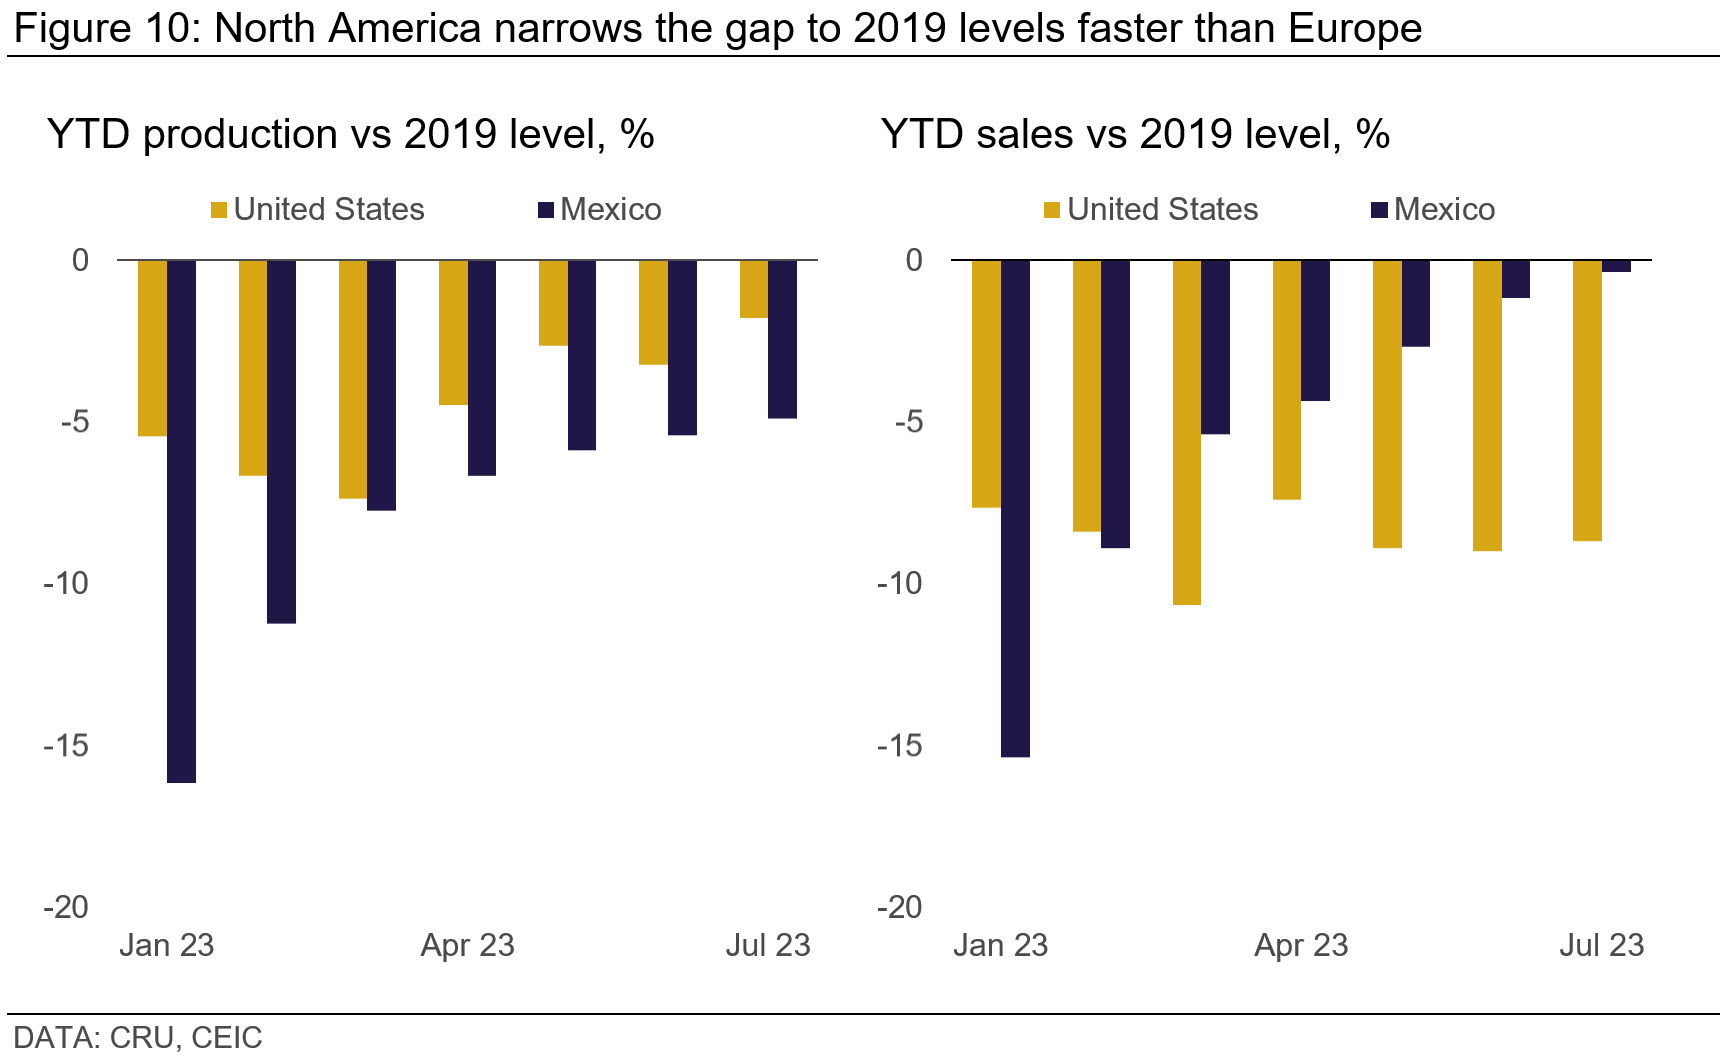 Graph showing that North America narrows the gap to 2019 levels faster than Europe